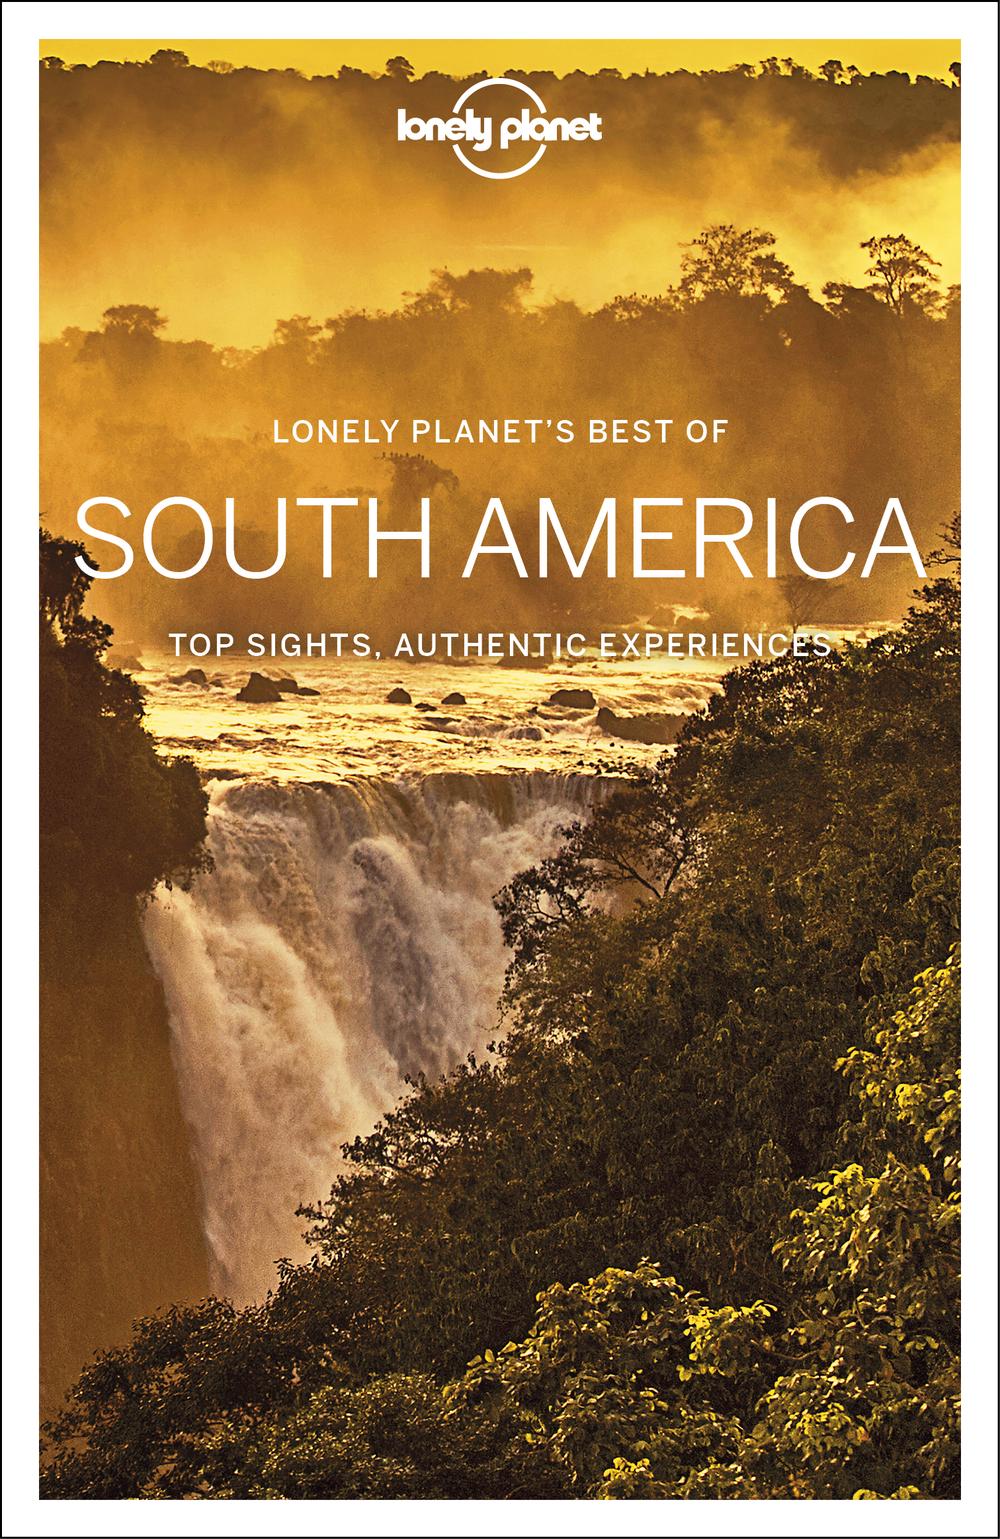 by　America　Lonely　Paperback,　of　Lonely　Planet　online　The　Best　9781788684729　South　at　Nile　Planet,　Buy